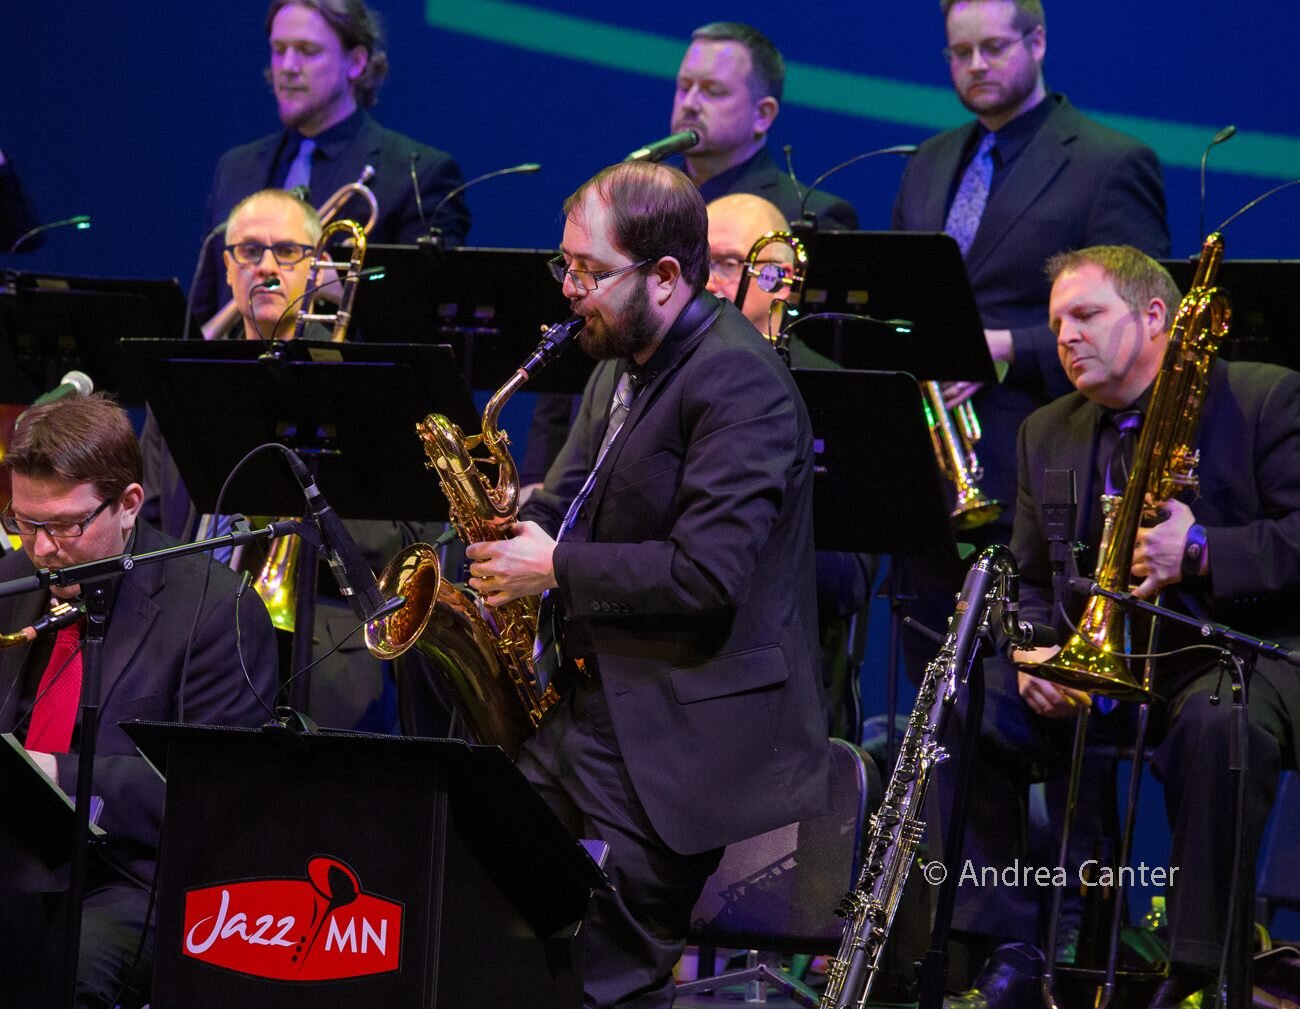 Brian soloing with the JazzMN Orchestra, April 2018 (photo credit: Andrea Canter)